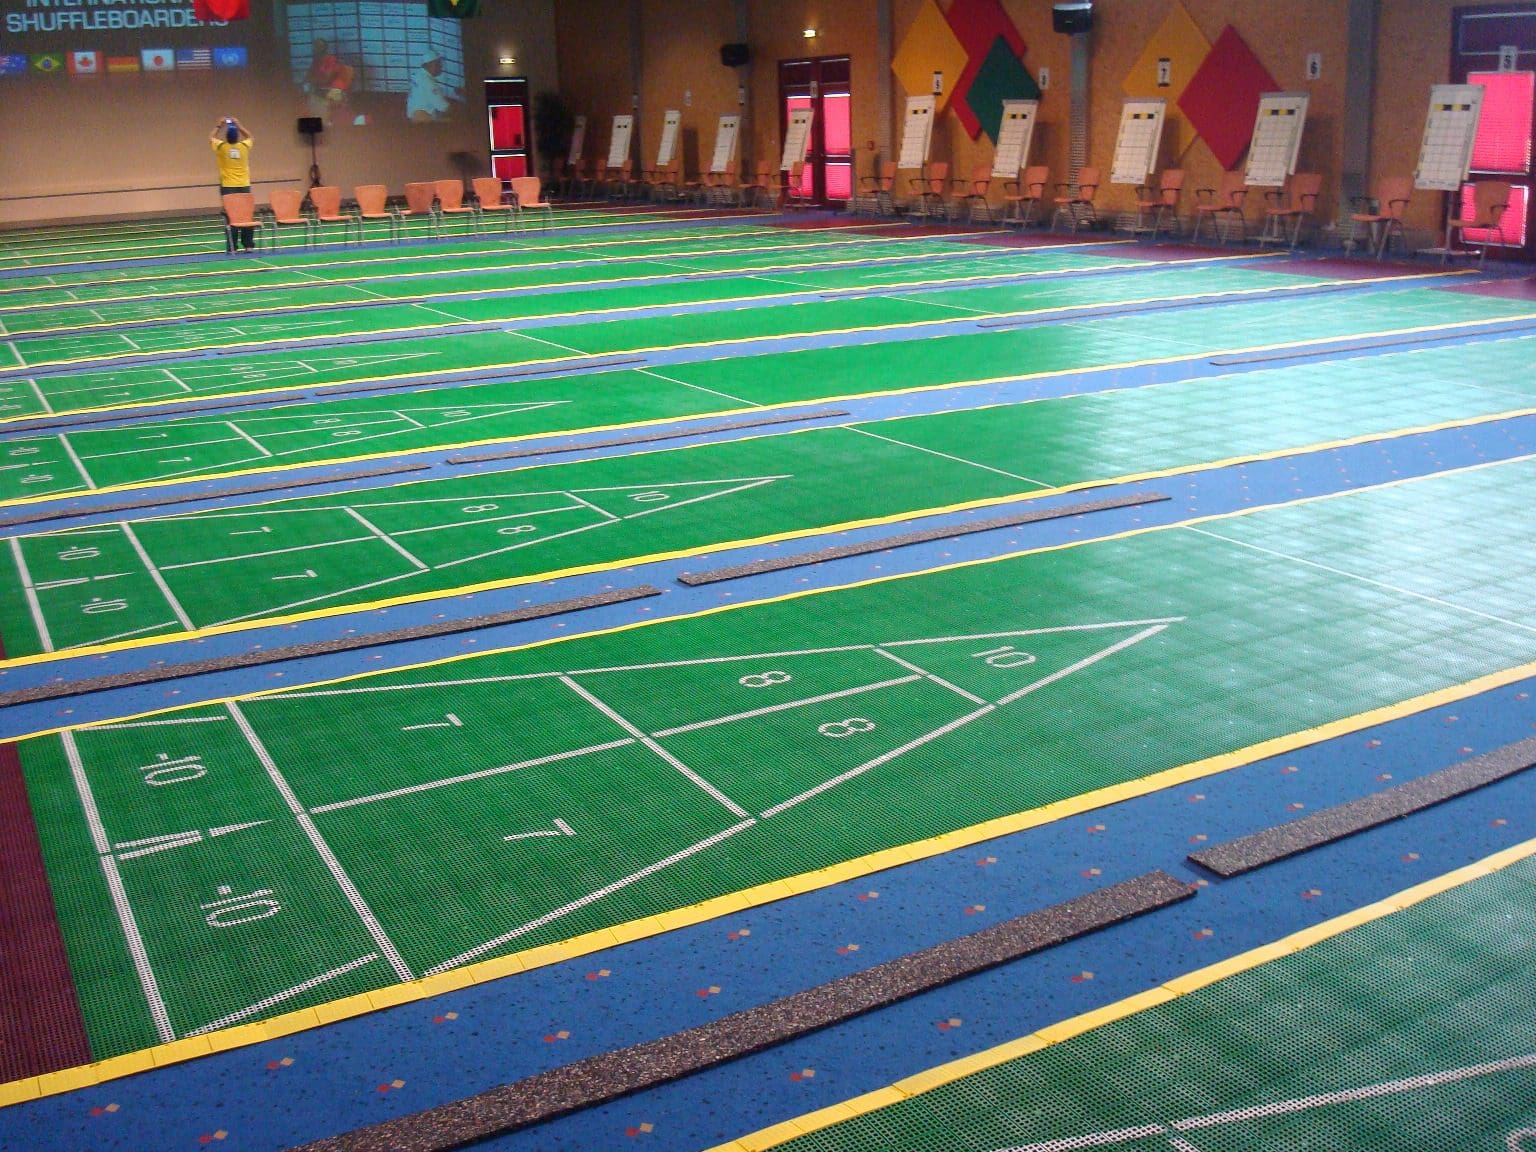 Upgrade Outdated Fixtures with Affordable LED Shuffleboard Court Lighting